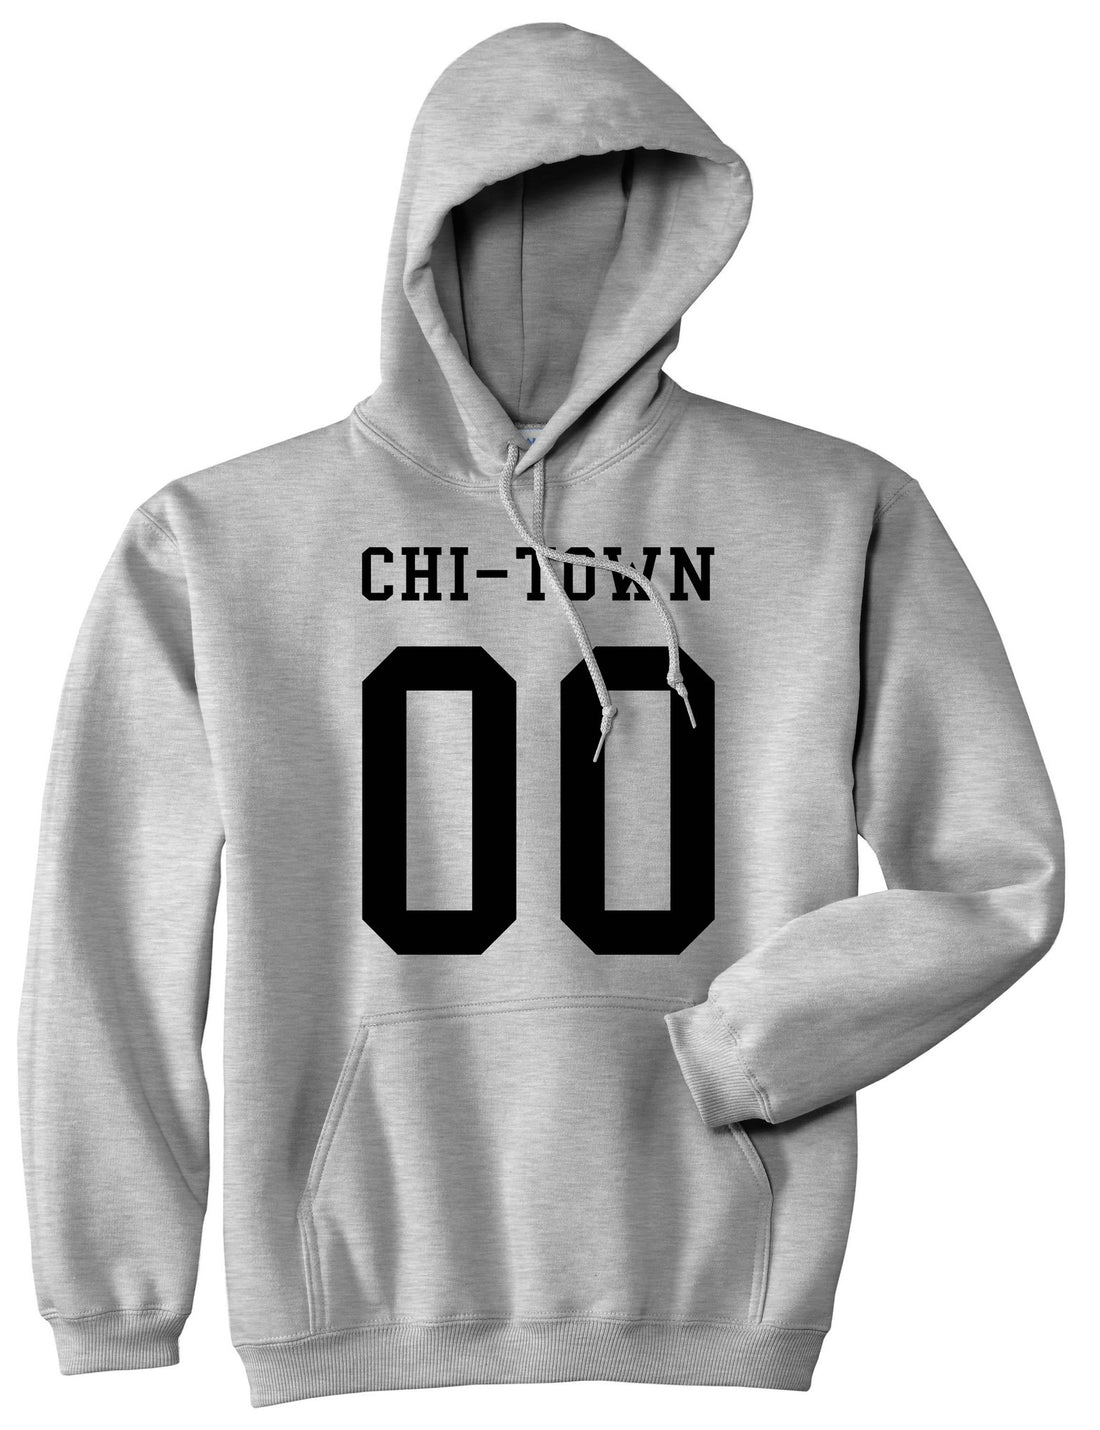 Chitown Team 00 Chicago Jersey Boys Kids Pullover Hoodie Hoody in Grey By Kings Of NY